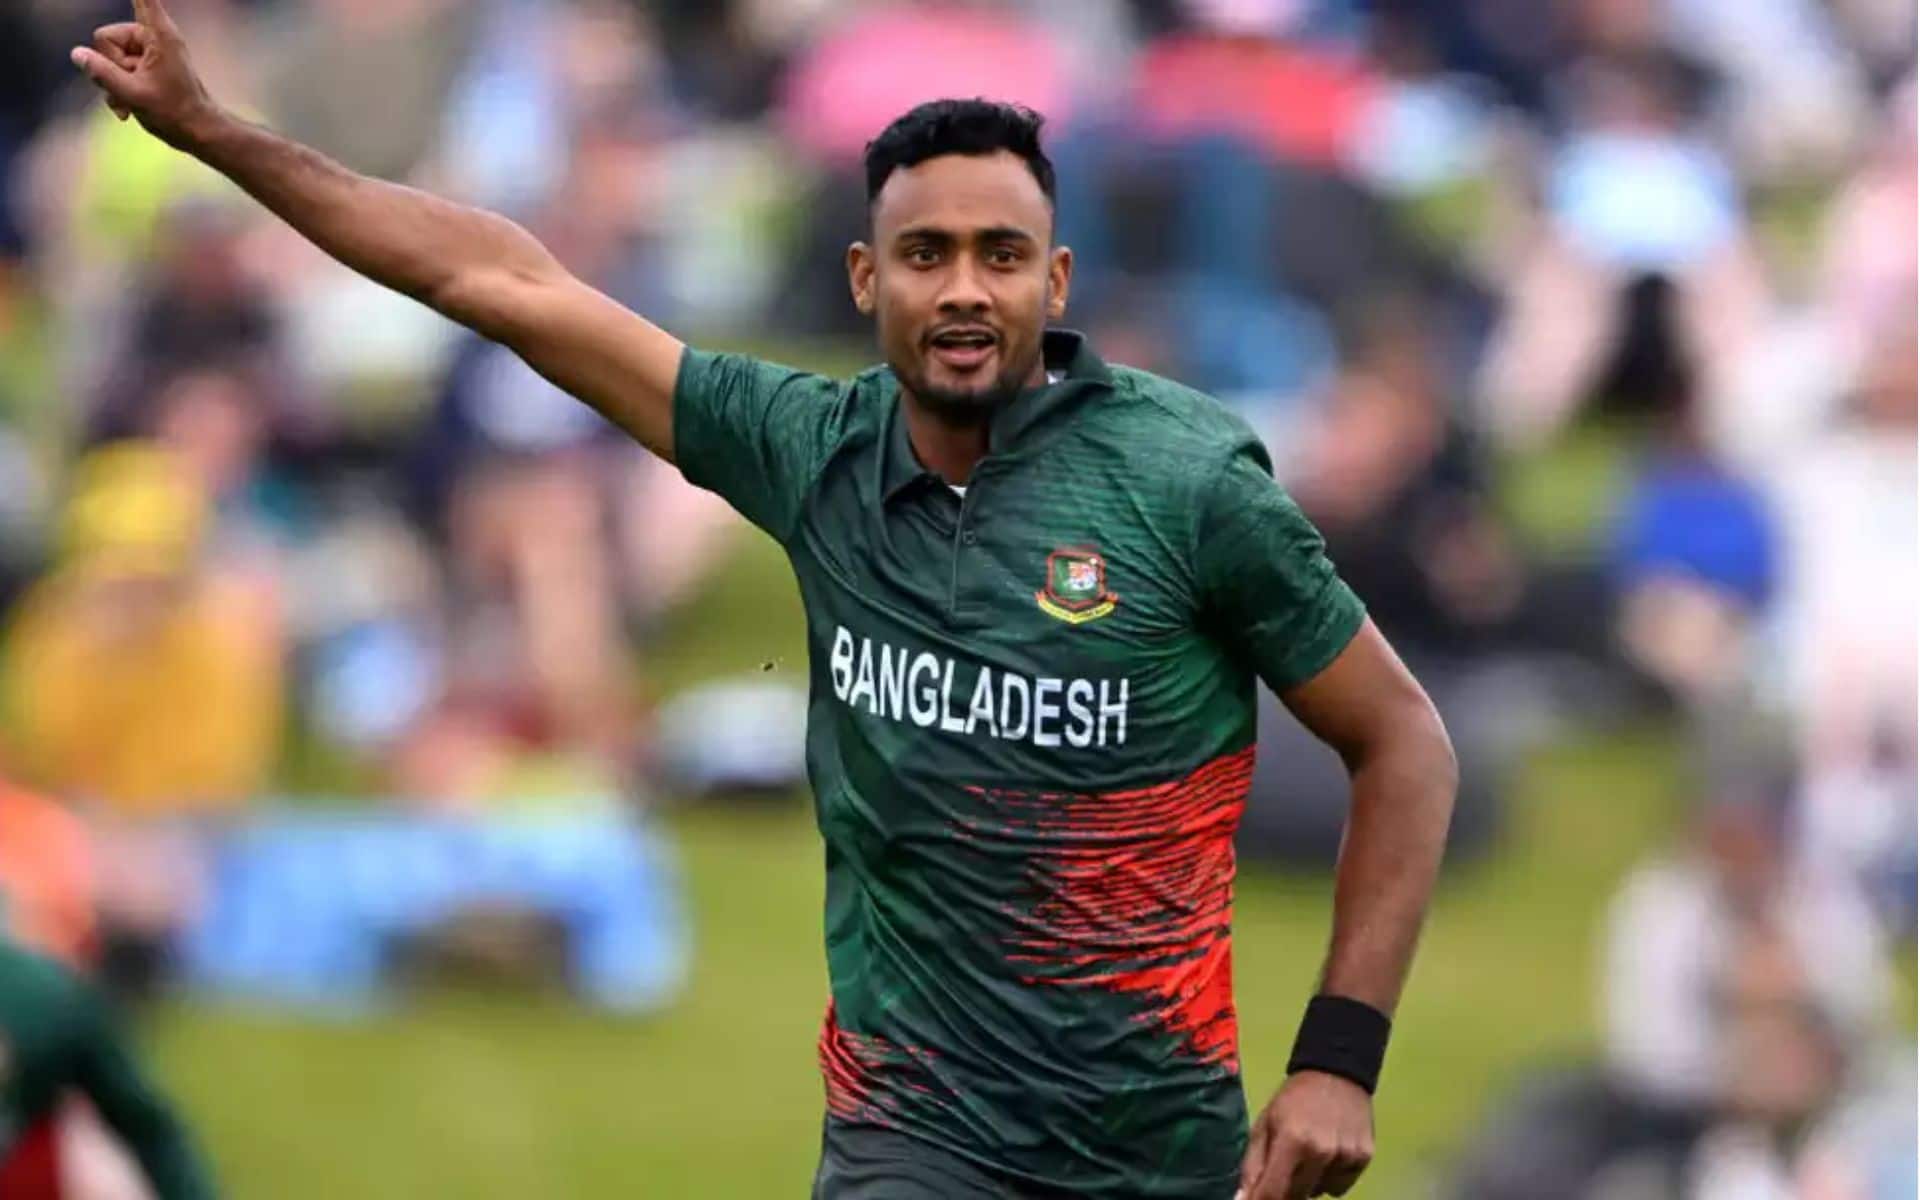 Shoriful is one Bangladesh's key pacers across formats (x.com)